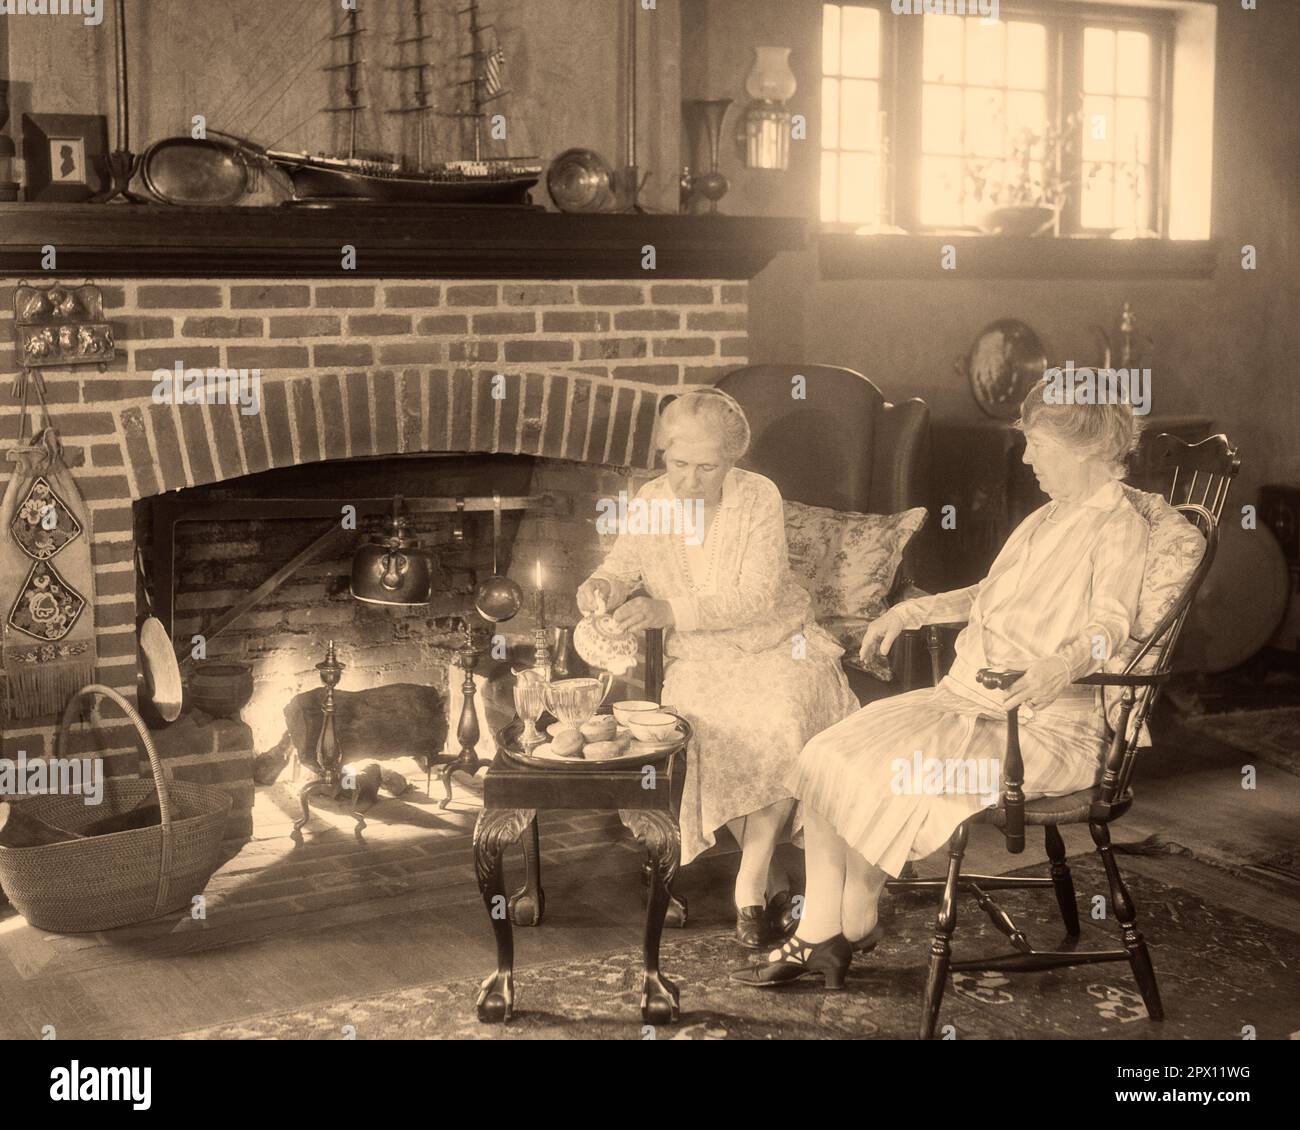 1930s TWO SENIOR GRANDMOTHERS SITTING TOGETHER BY FIREPLACE ONE POURING TEA FOR THE OTHER - m3115 HAR001 HARS HOME LIFE COPY SPACE FRIENDSHIP FULL-LENGTH LADIES PERSONS INSPIRATION SENIOR ADULT B&W SENIOR WOMAN DECORATION DECOR OLD AGE OLDSTERS OLDSTER INTERIORS GRANDMOTHERS ELDERS FRIENDLY INTERIOR DESIGN TEA TIME TEAPOT ELDERLY WOMAN HOME DECOR RELAXATION TOGETHERNESS BLACK AND WHITE CAUCASIAN ETHNICITY FURNISHINGS HAR001 OLD FASHIONED Stock Photo